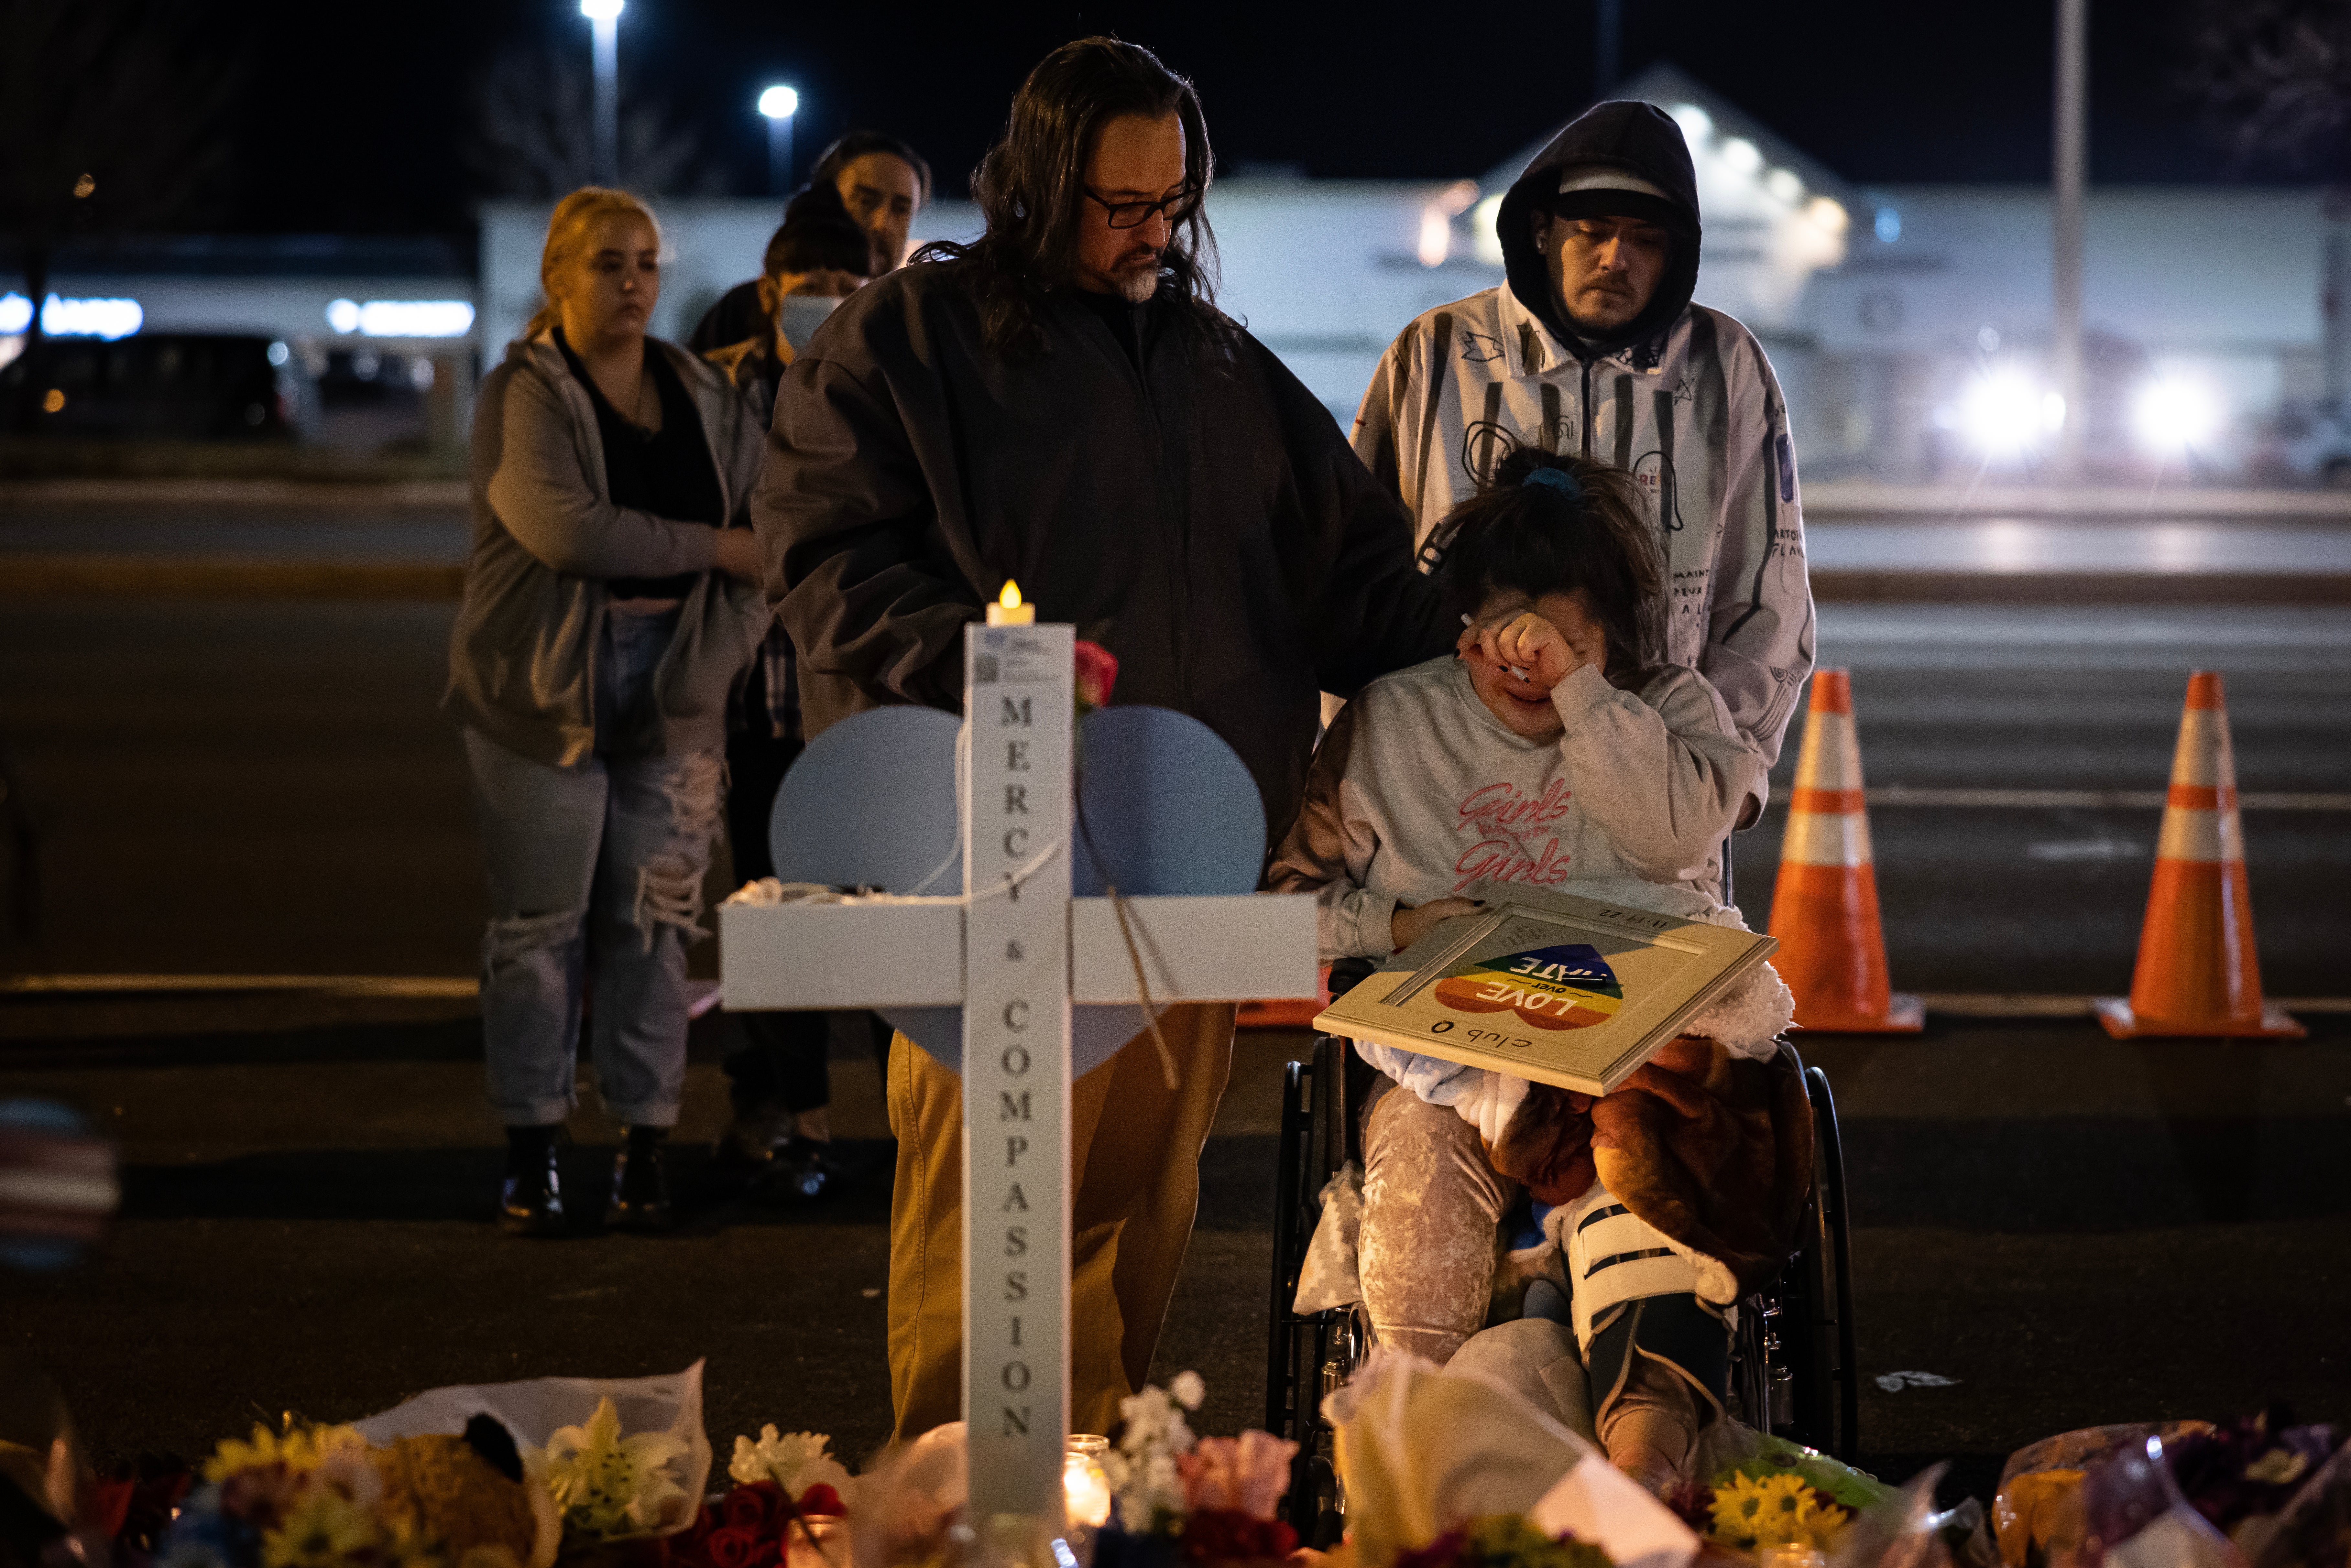 Richard Fierro consoles his daughter Kassandra on 22 November at a memorial for her boyfriend who was fatally shot during a mass shooting at Club Q in Colorado Springs.